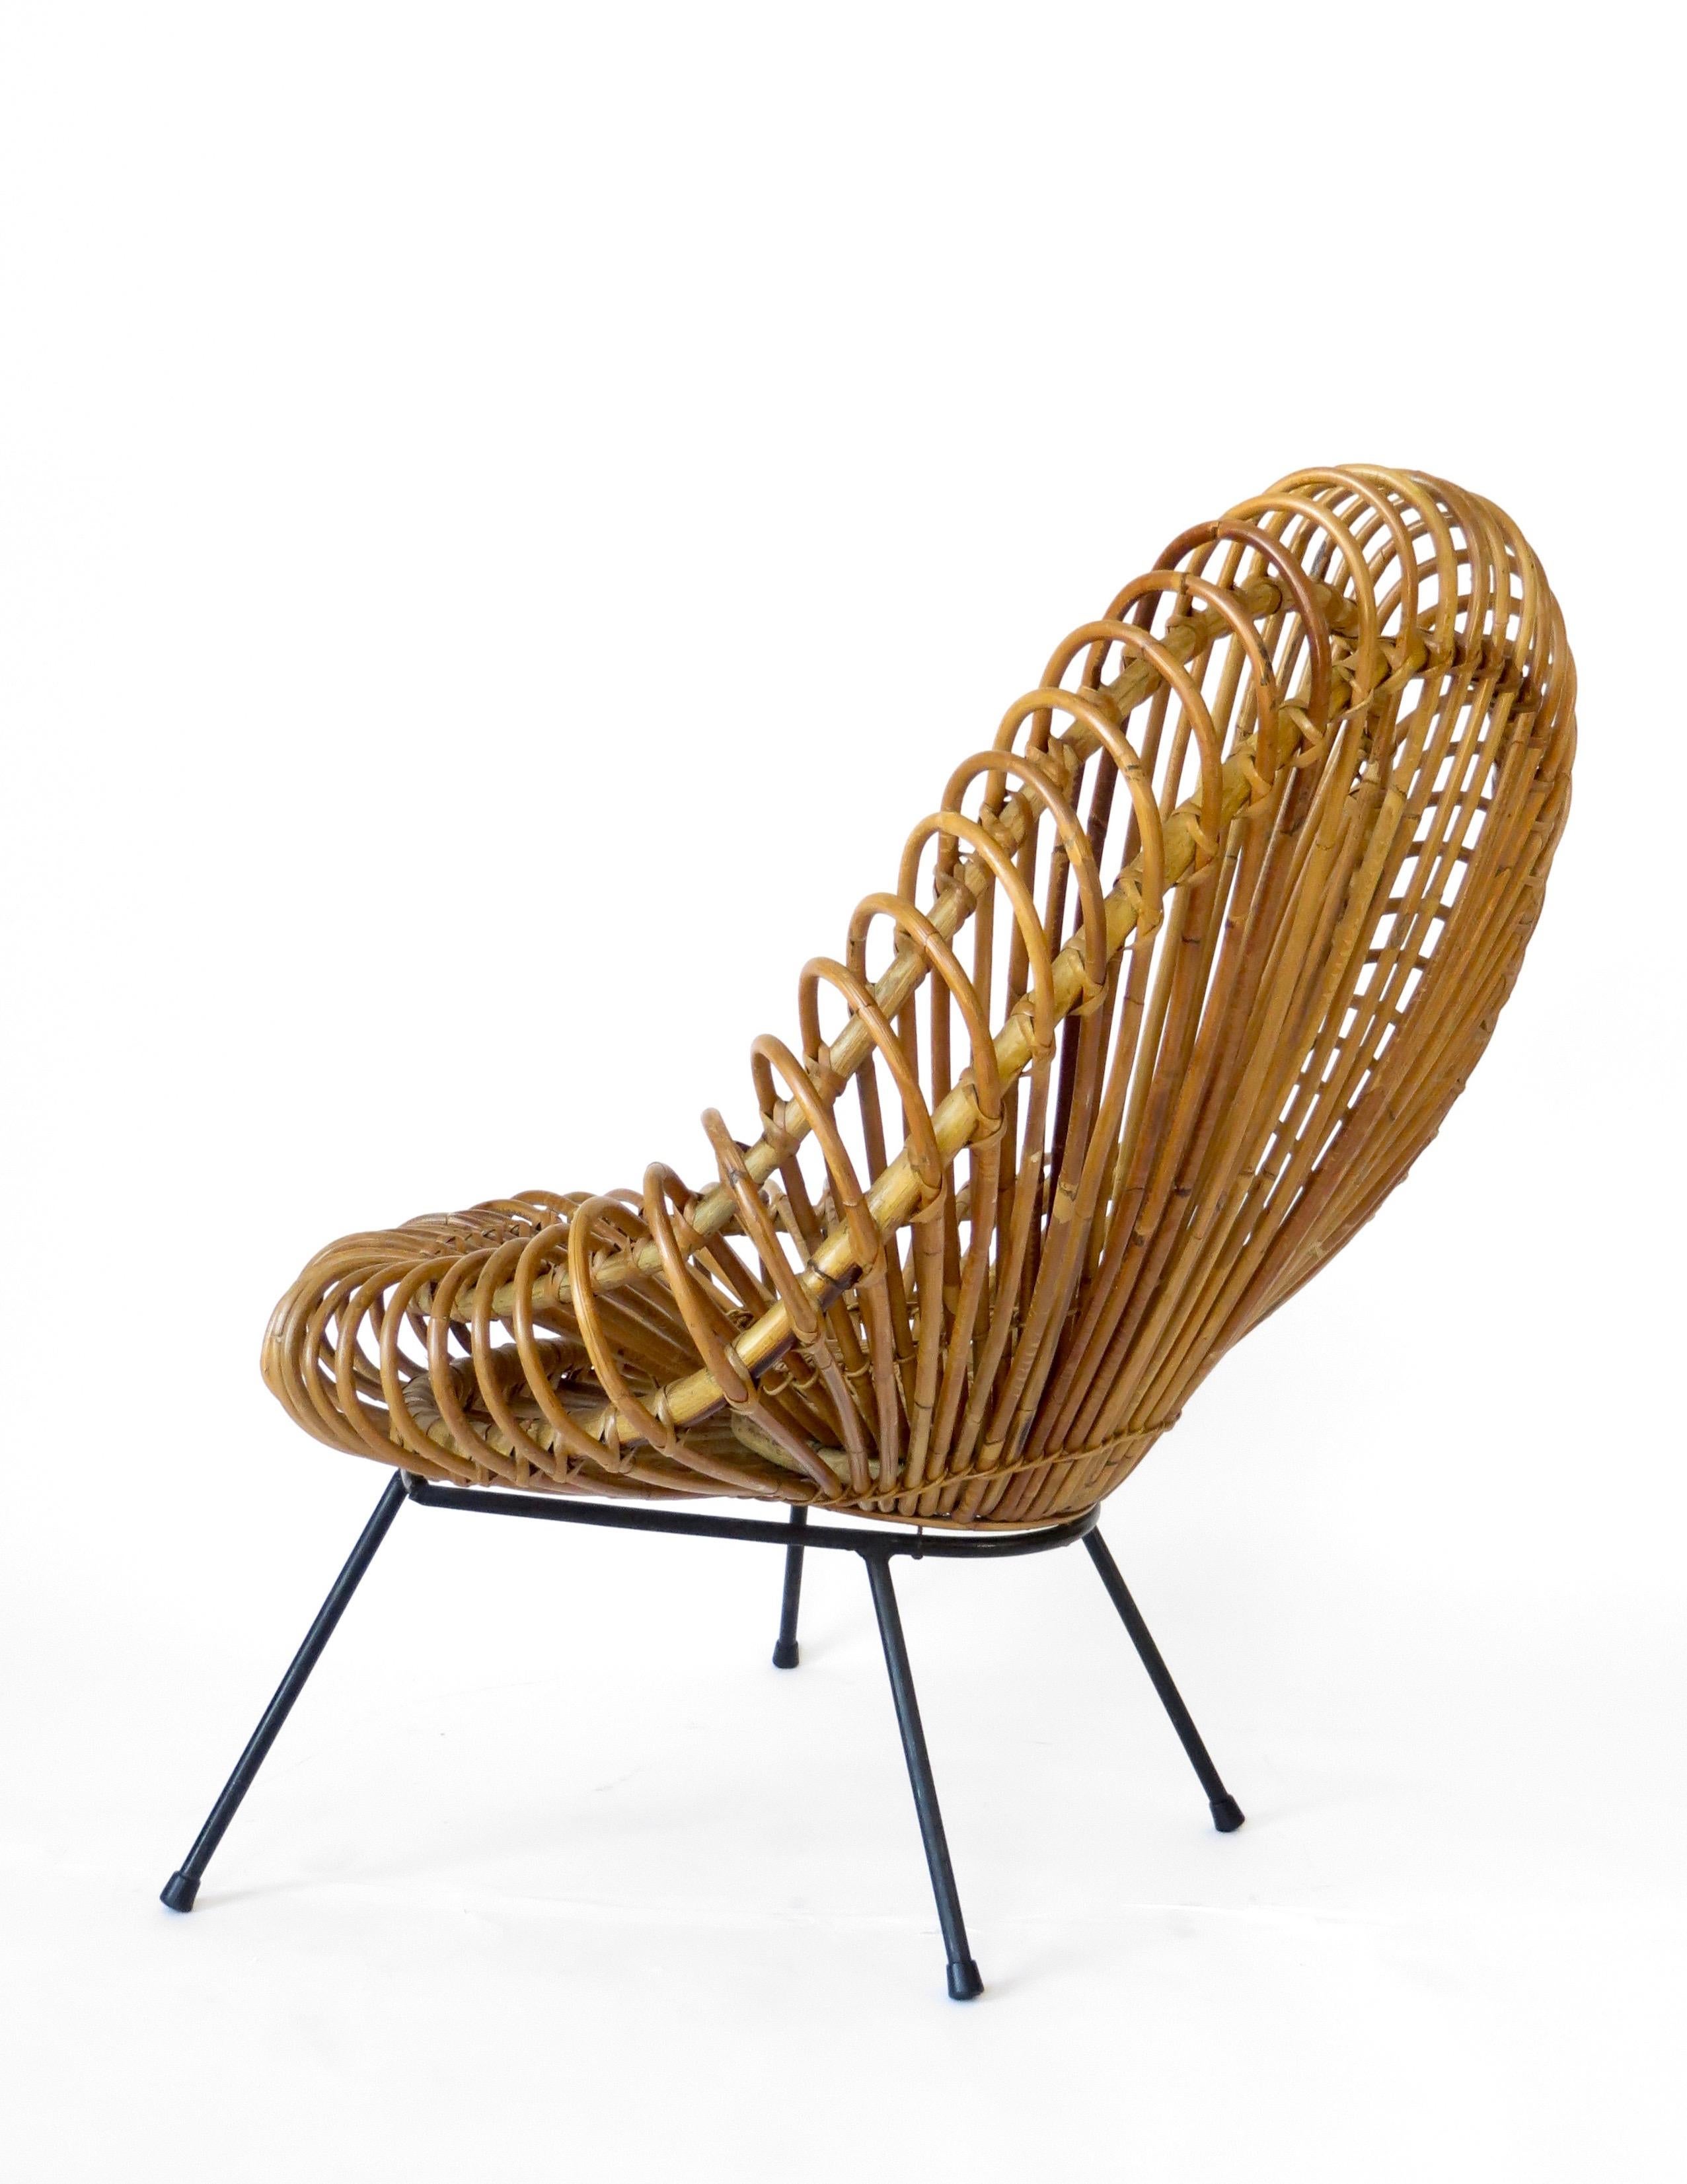 Mid-Century Modern Janine Abraham and Dirk Jan Rol Rattan Lounge Chair Edition Rougier